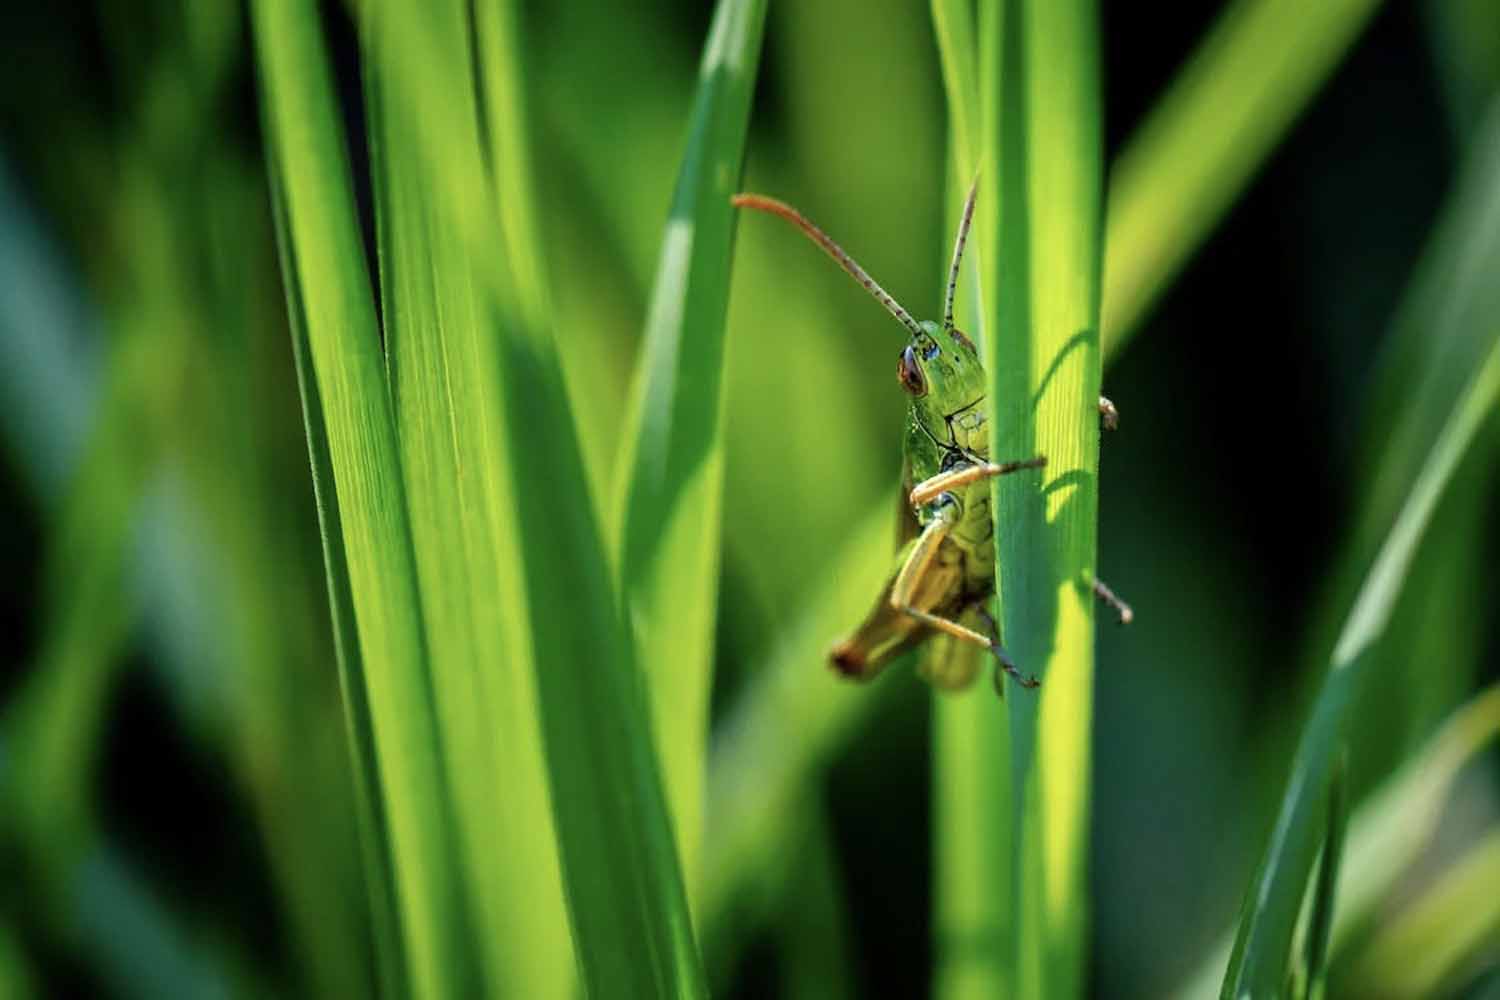 Grasshopper perched on a tall blade of grass